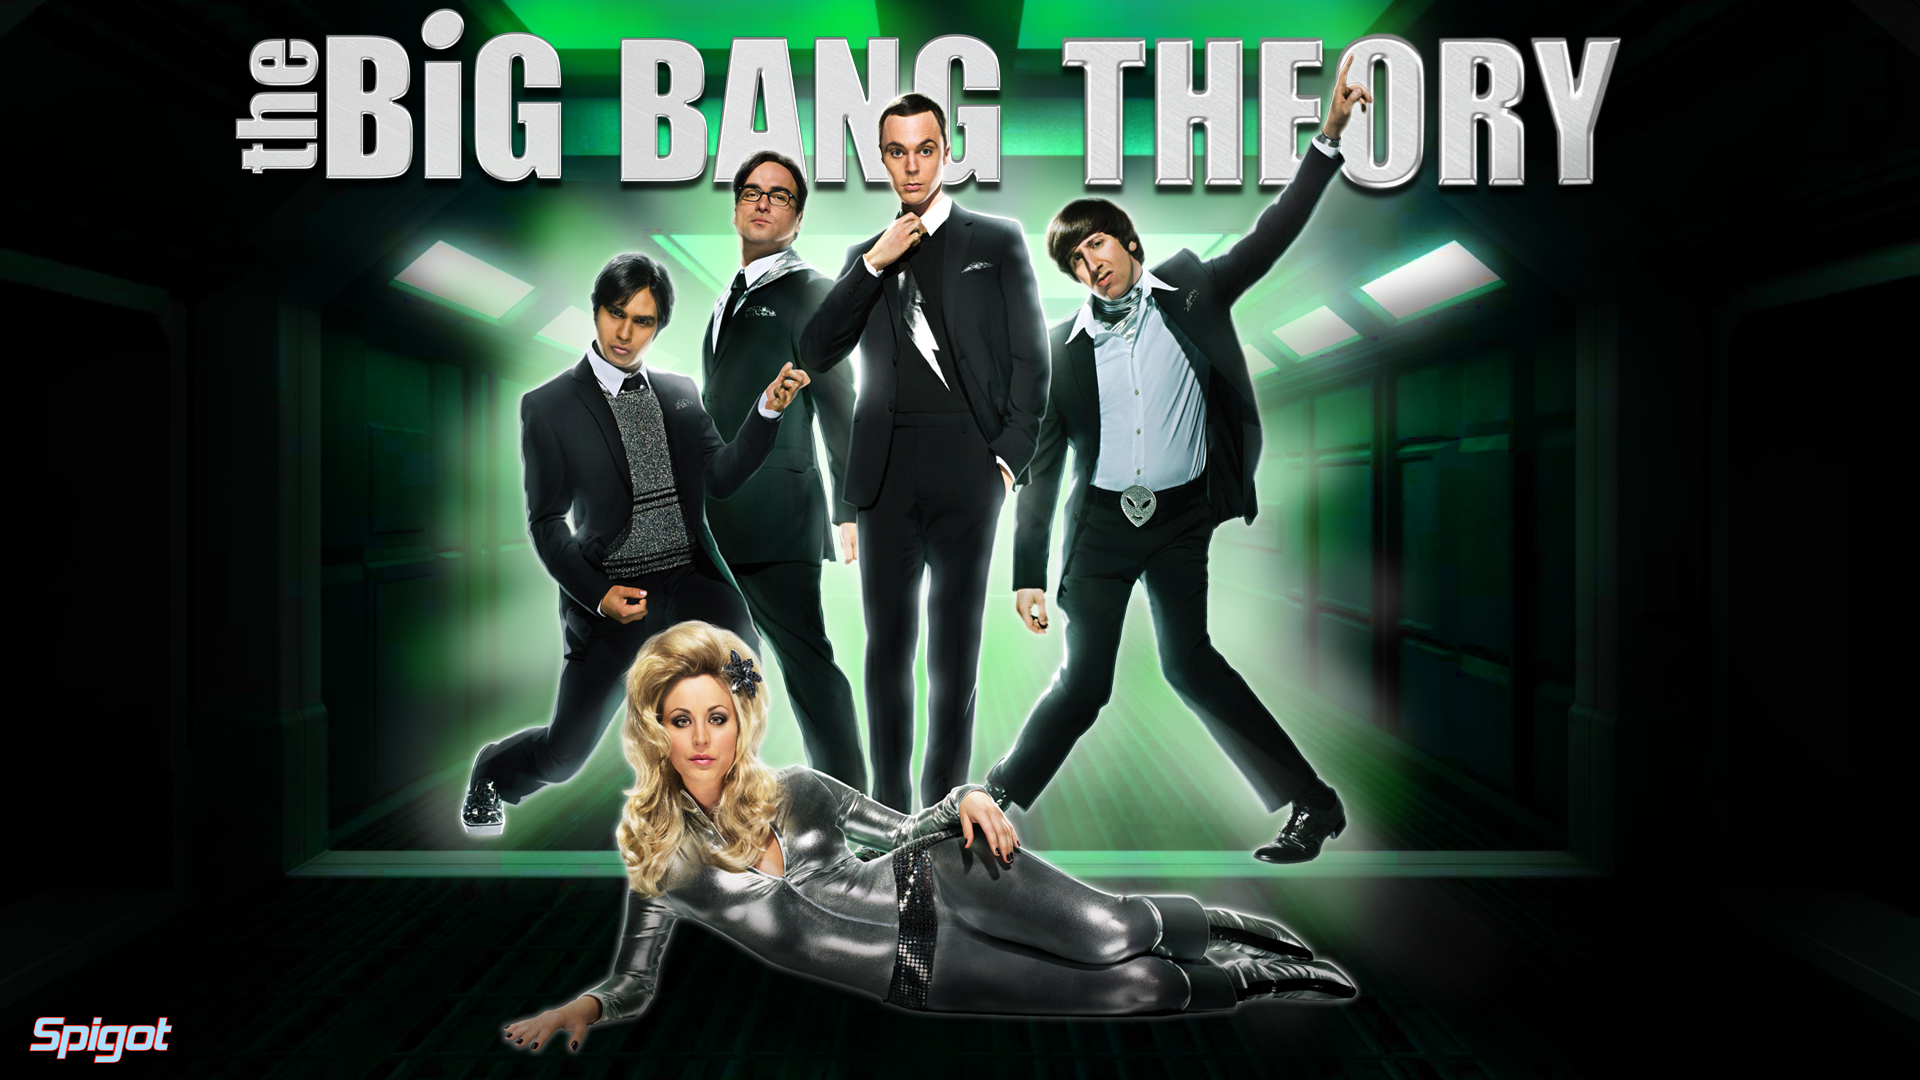 Heres a wallpaper I made of this awesome show The Big Bang Theory